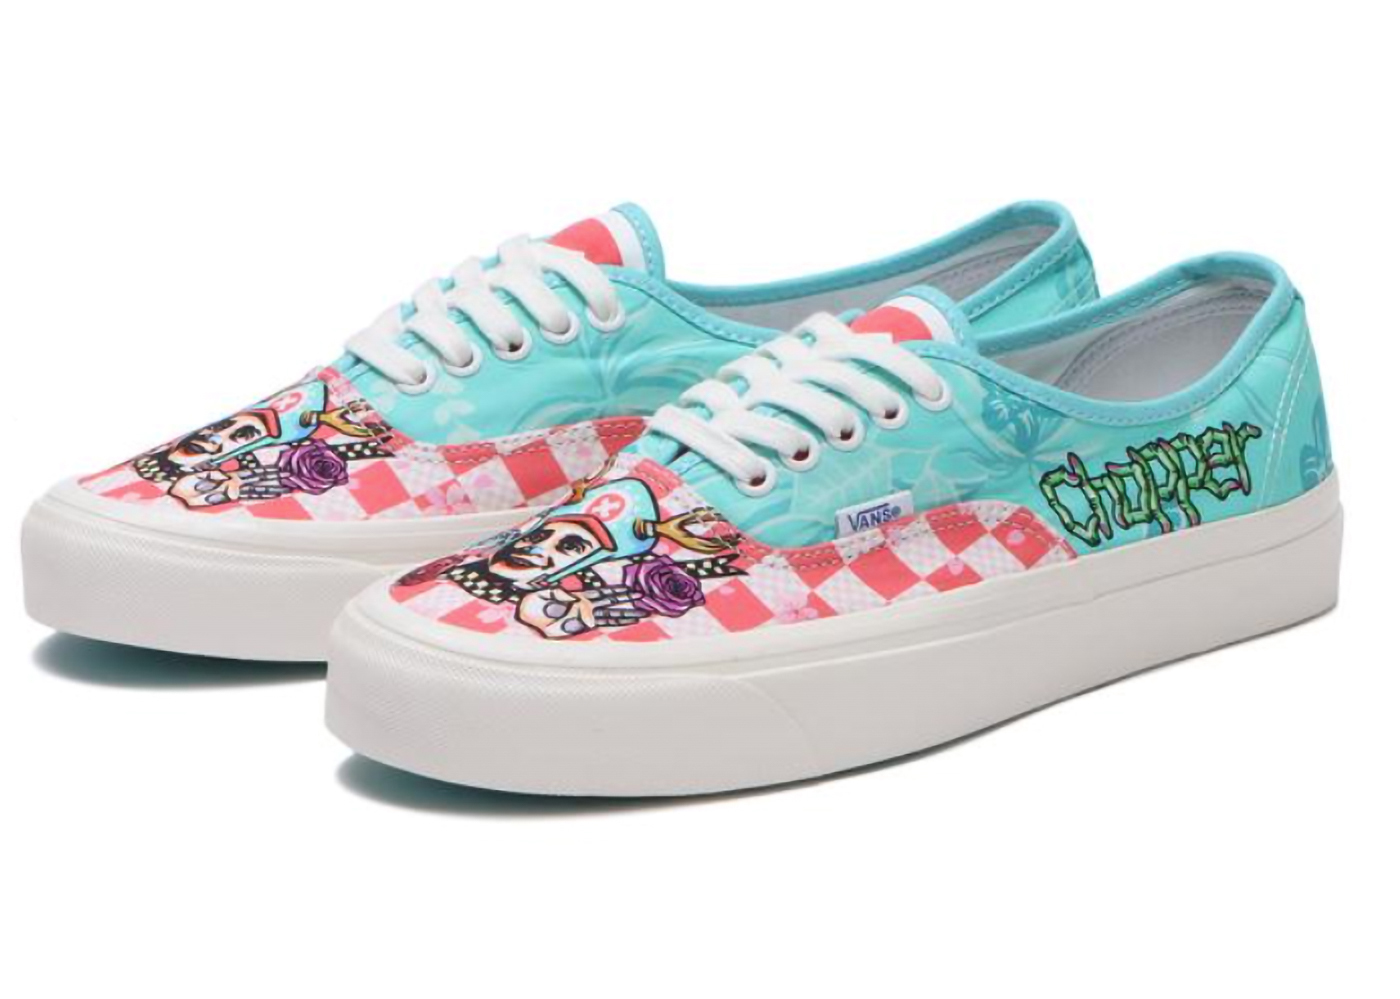 One Piece x Vans Authentic First Look | Hypebeast